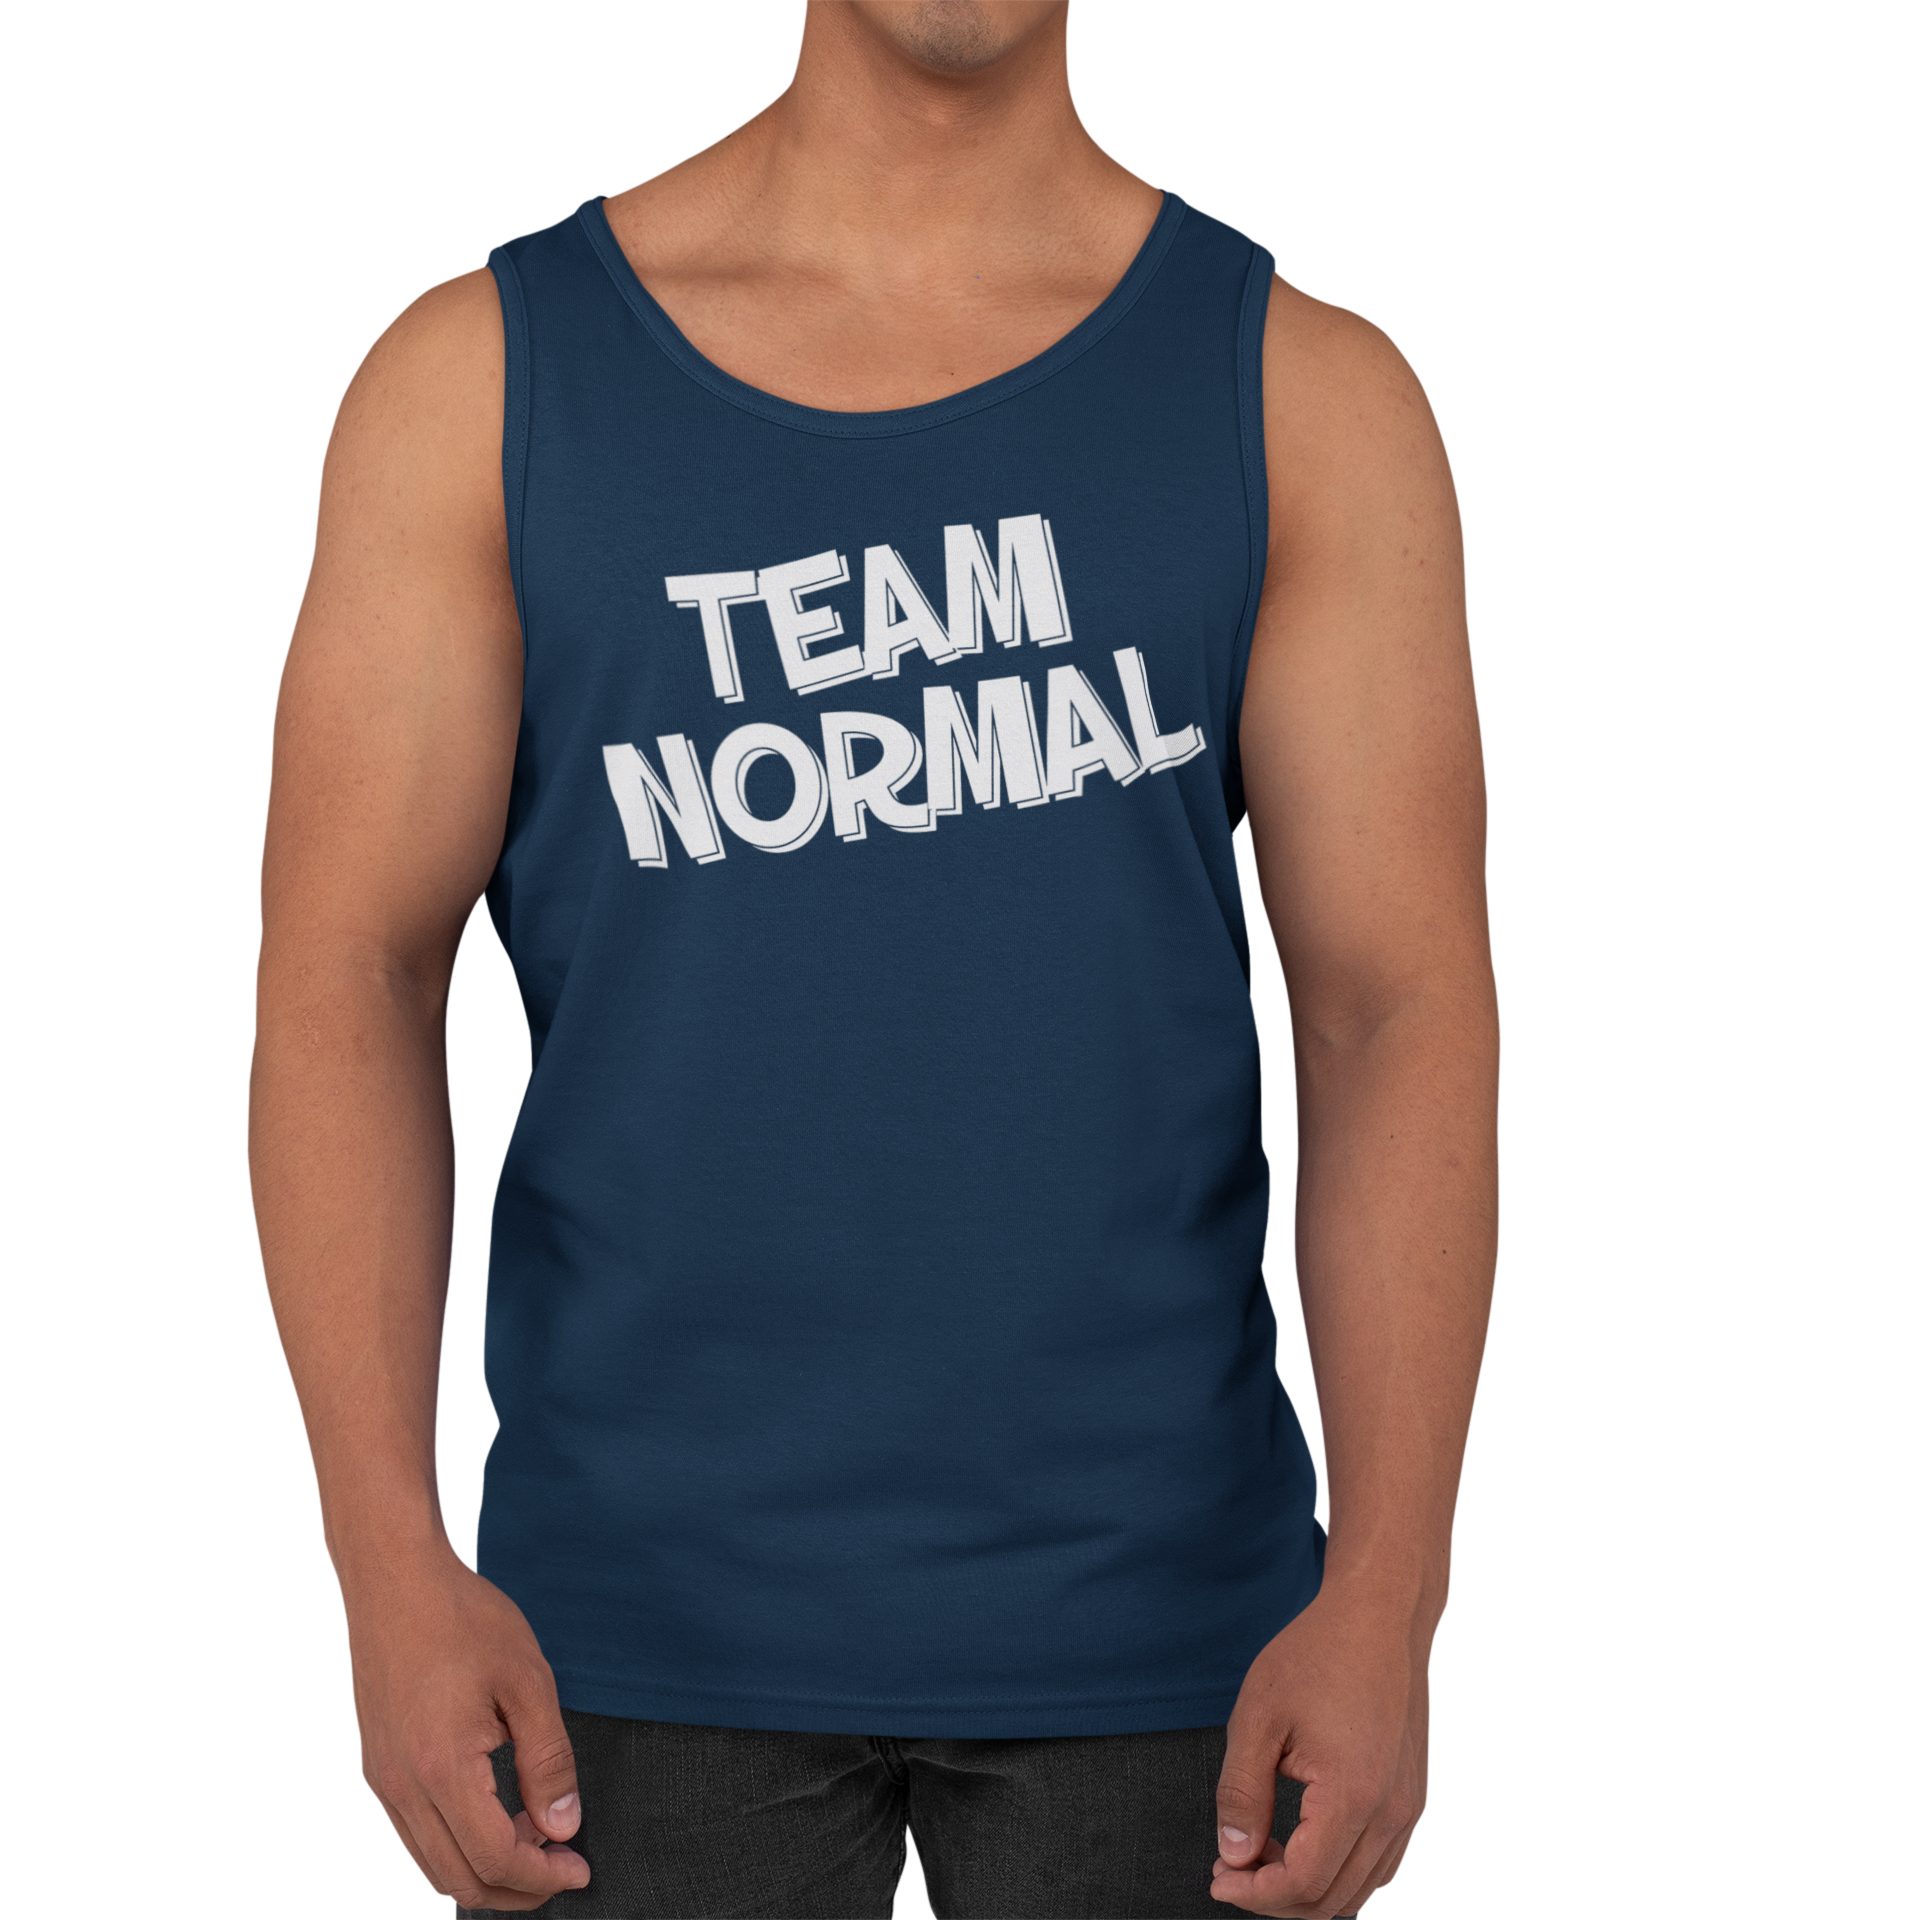 Team Normal Men's Softstyle Tank Top